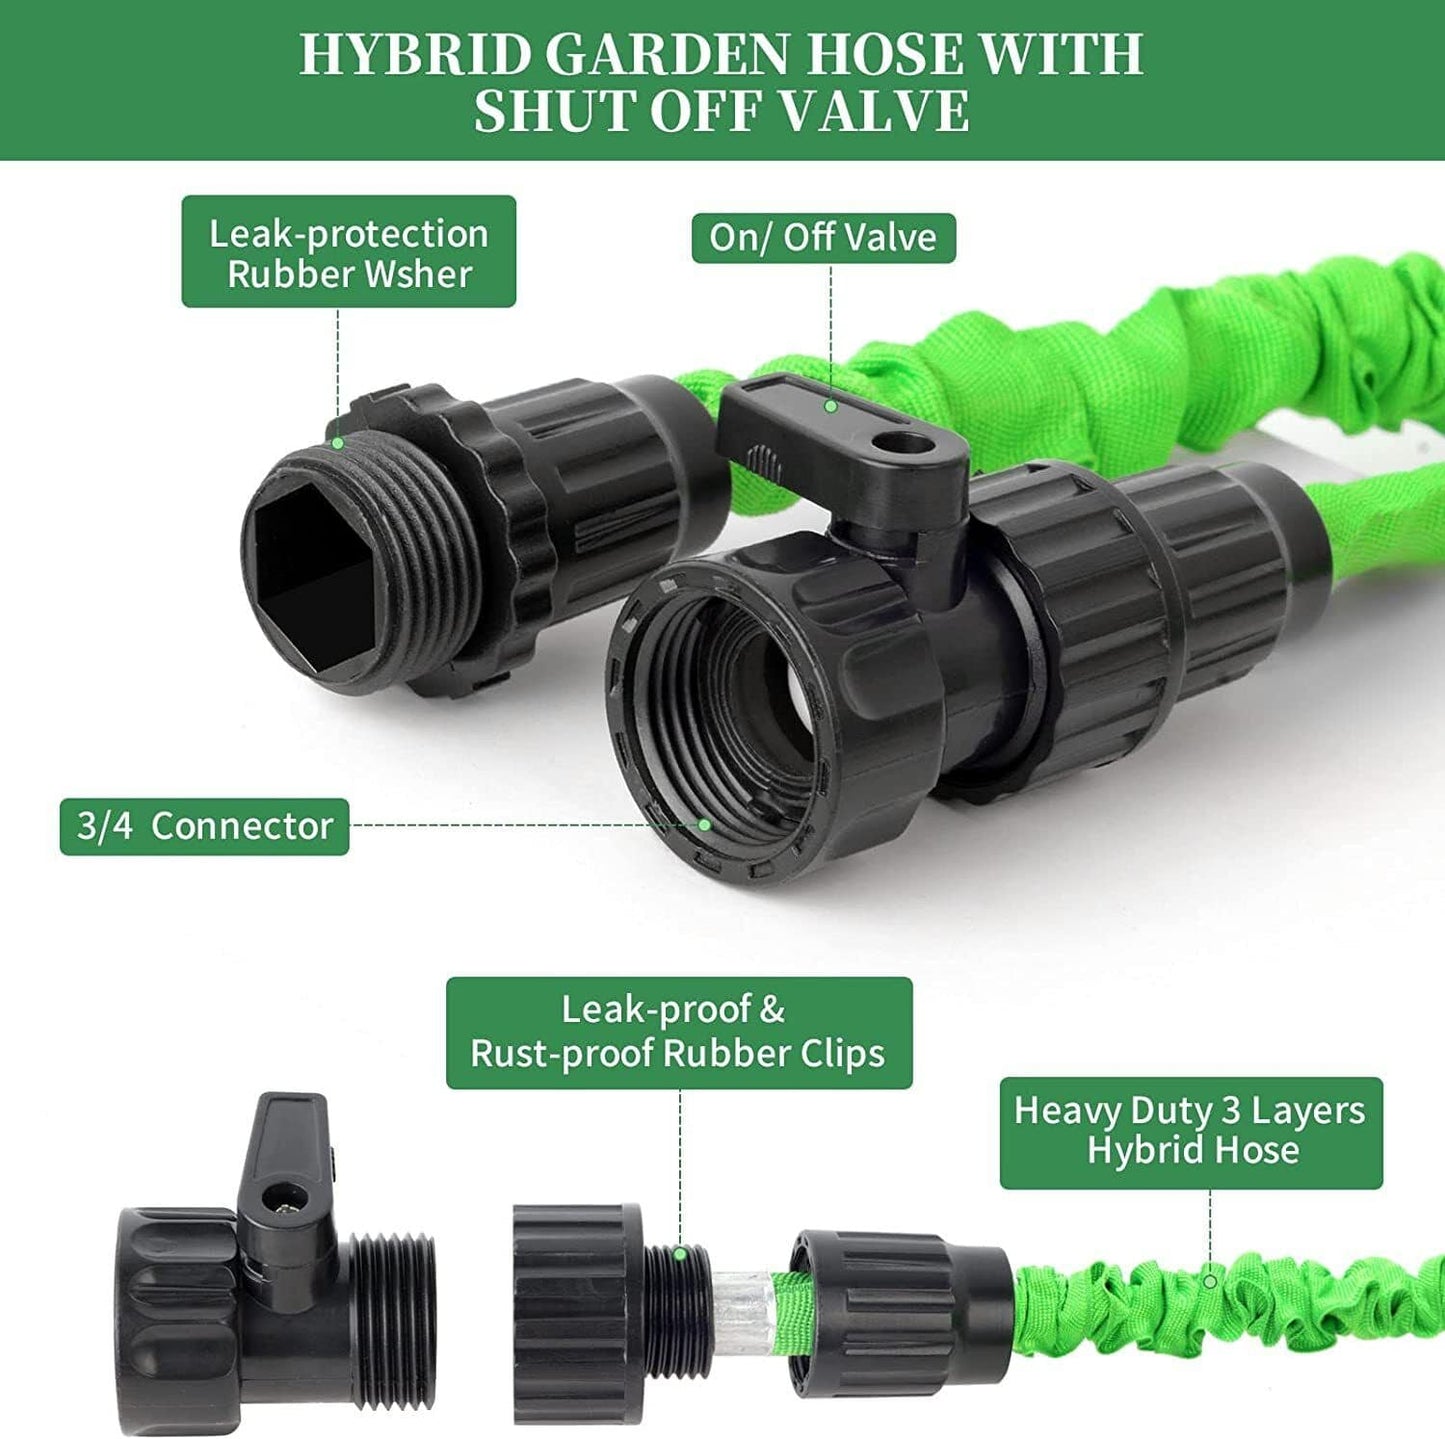 Water Hose Expandable Flexible with Nozzle 2 Sizes 50ft-100ft